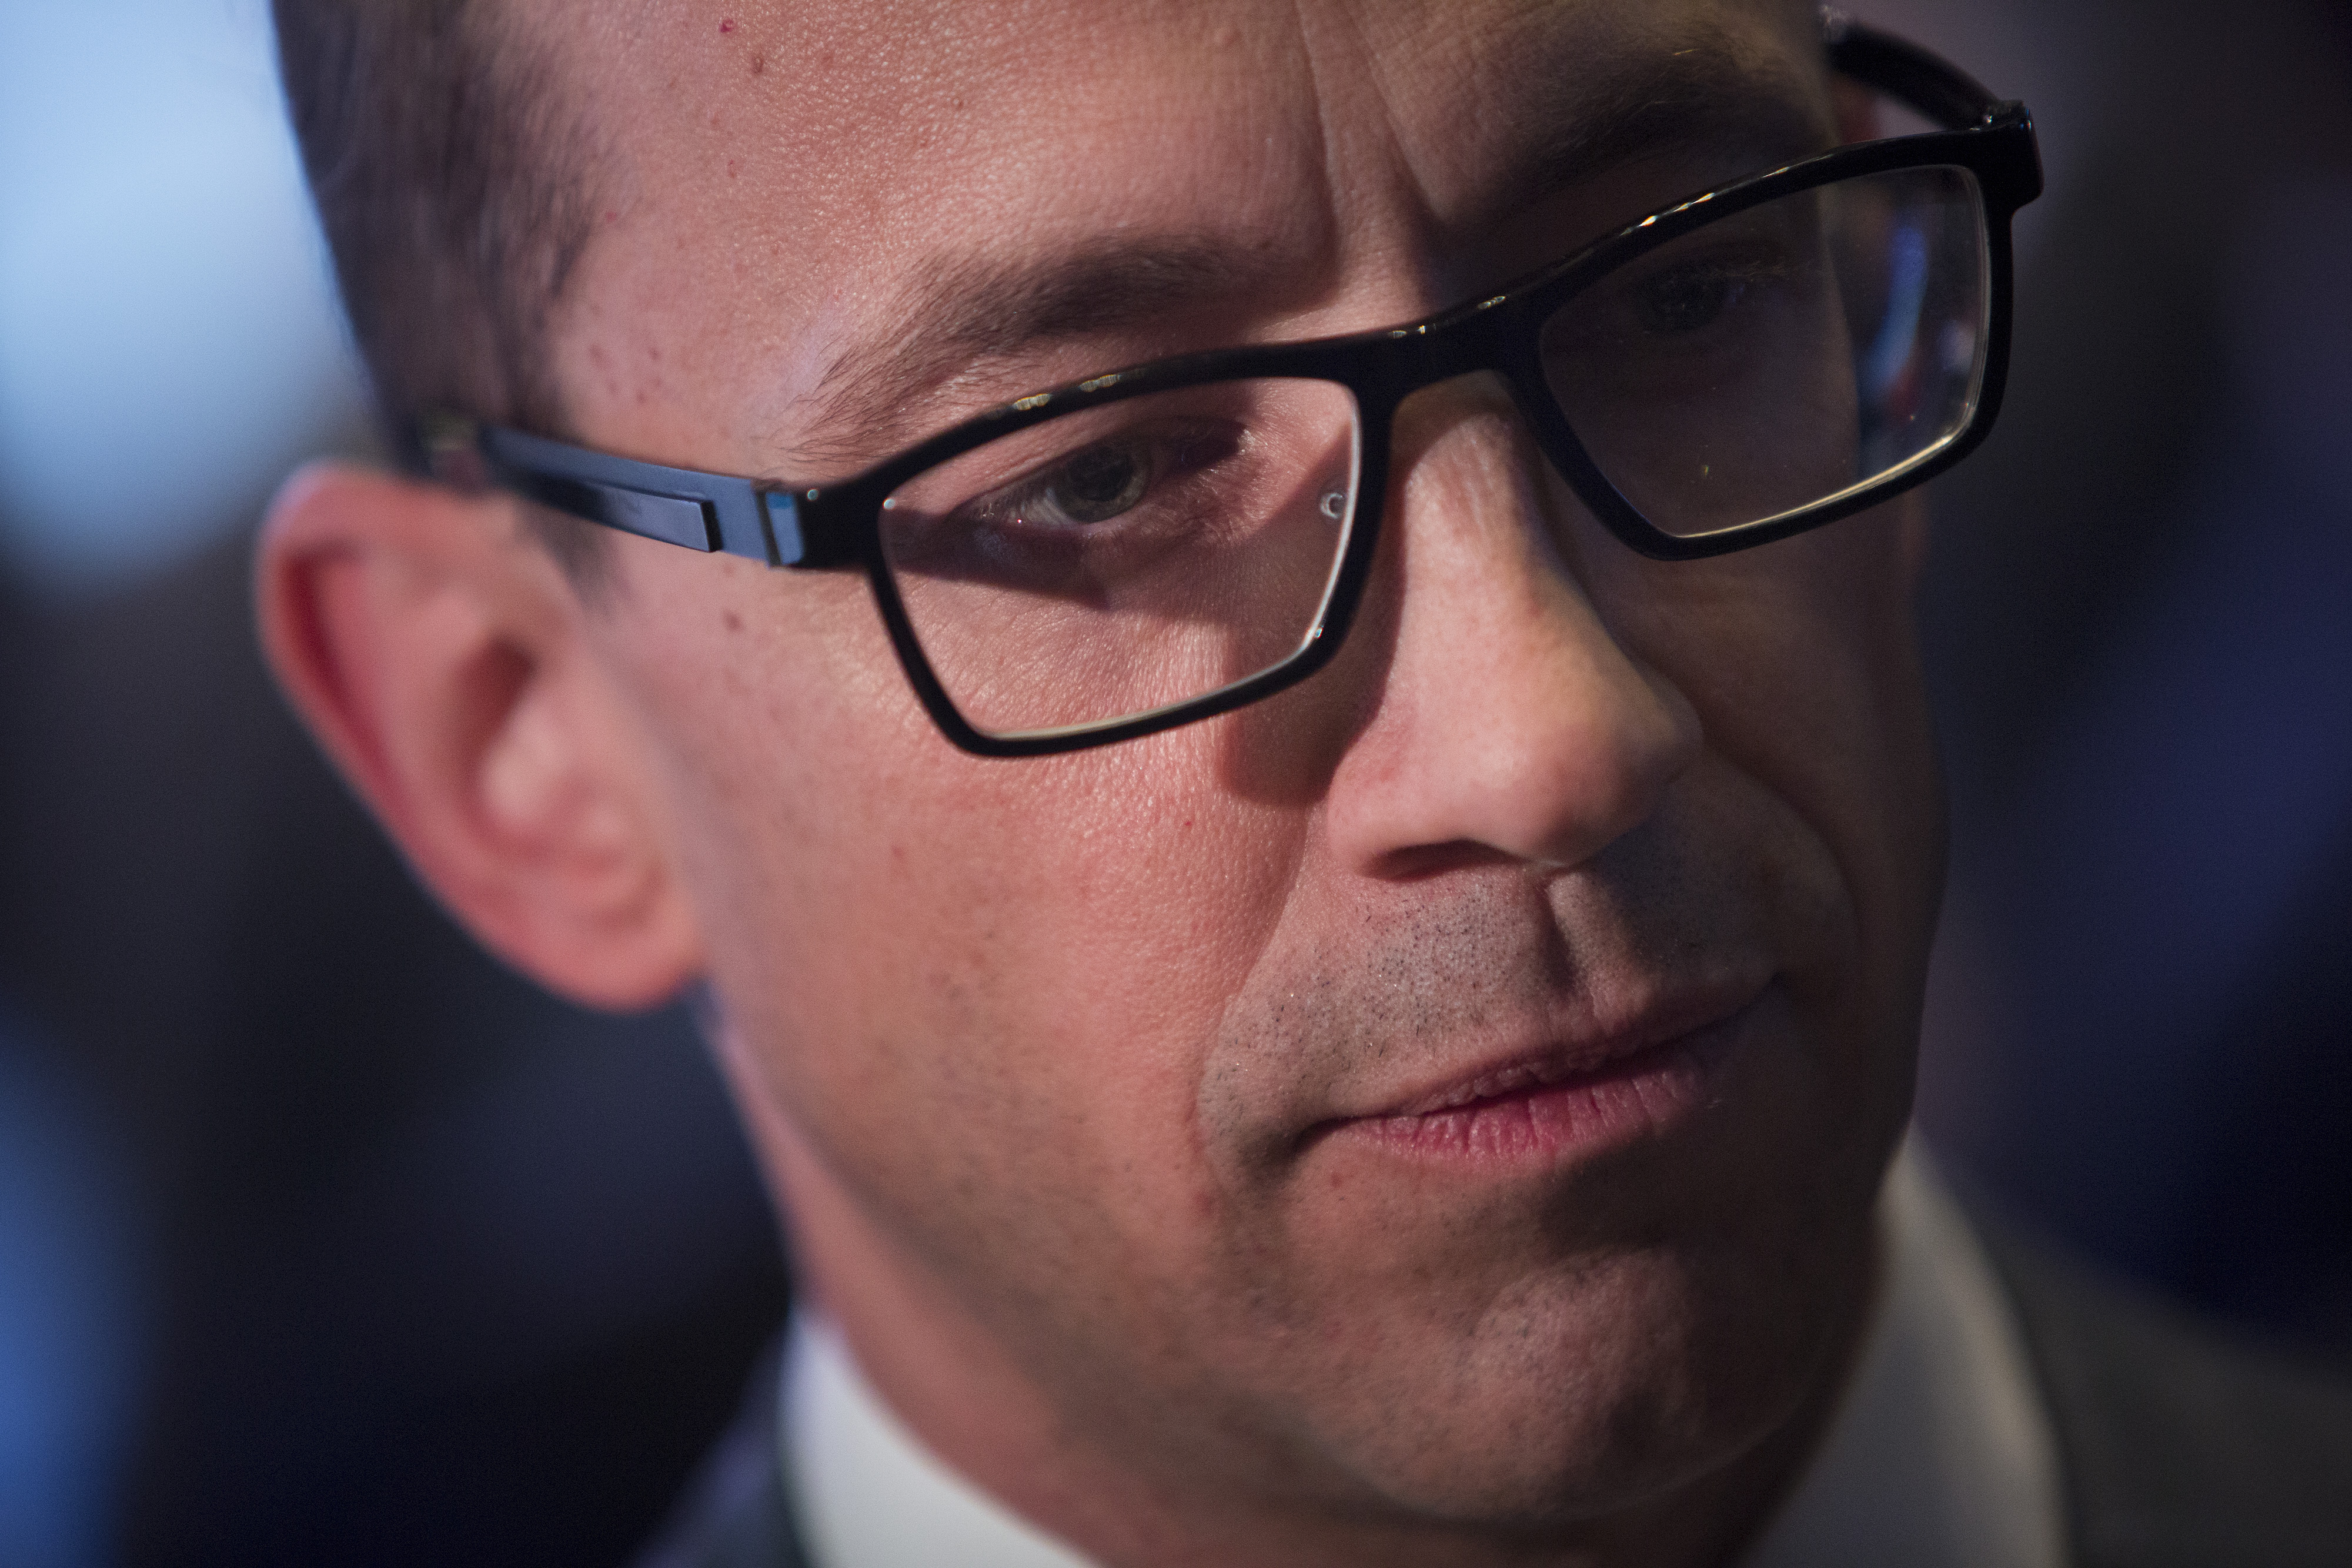 Richard "Dick" Costolo, chief executive officer of Twitter Inc., speaks on the floor of the New York Stock Exchange in New York, U.S., on Thursday, Nov. 7, 2013. (Bloomberg&mdash;Bloomberg via Getty Images)